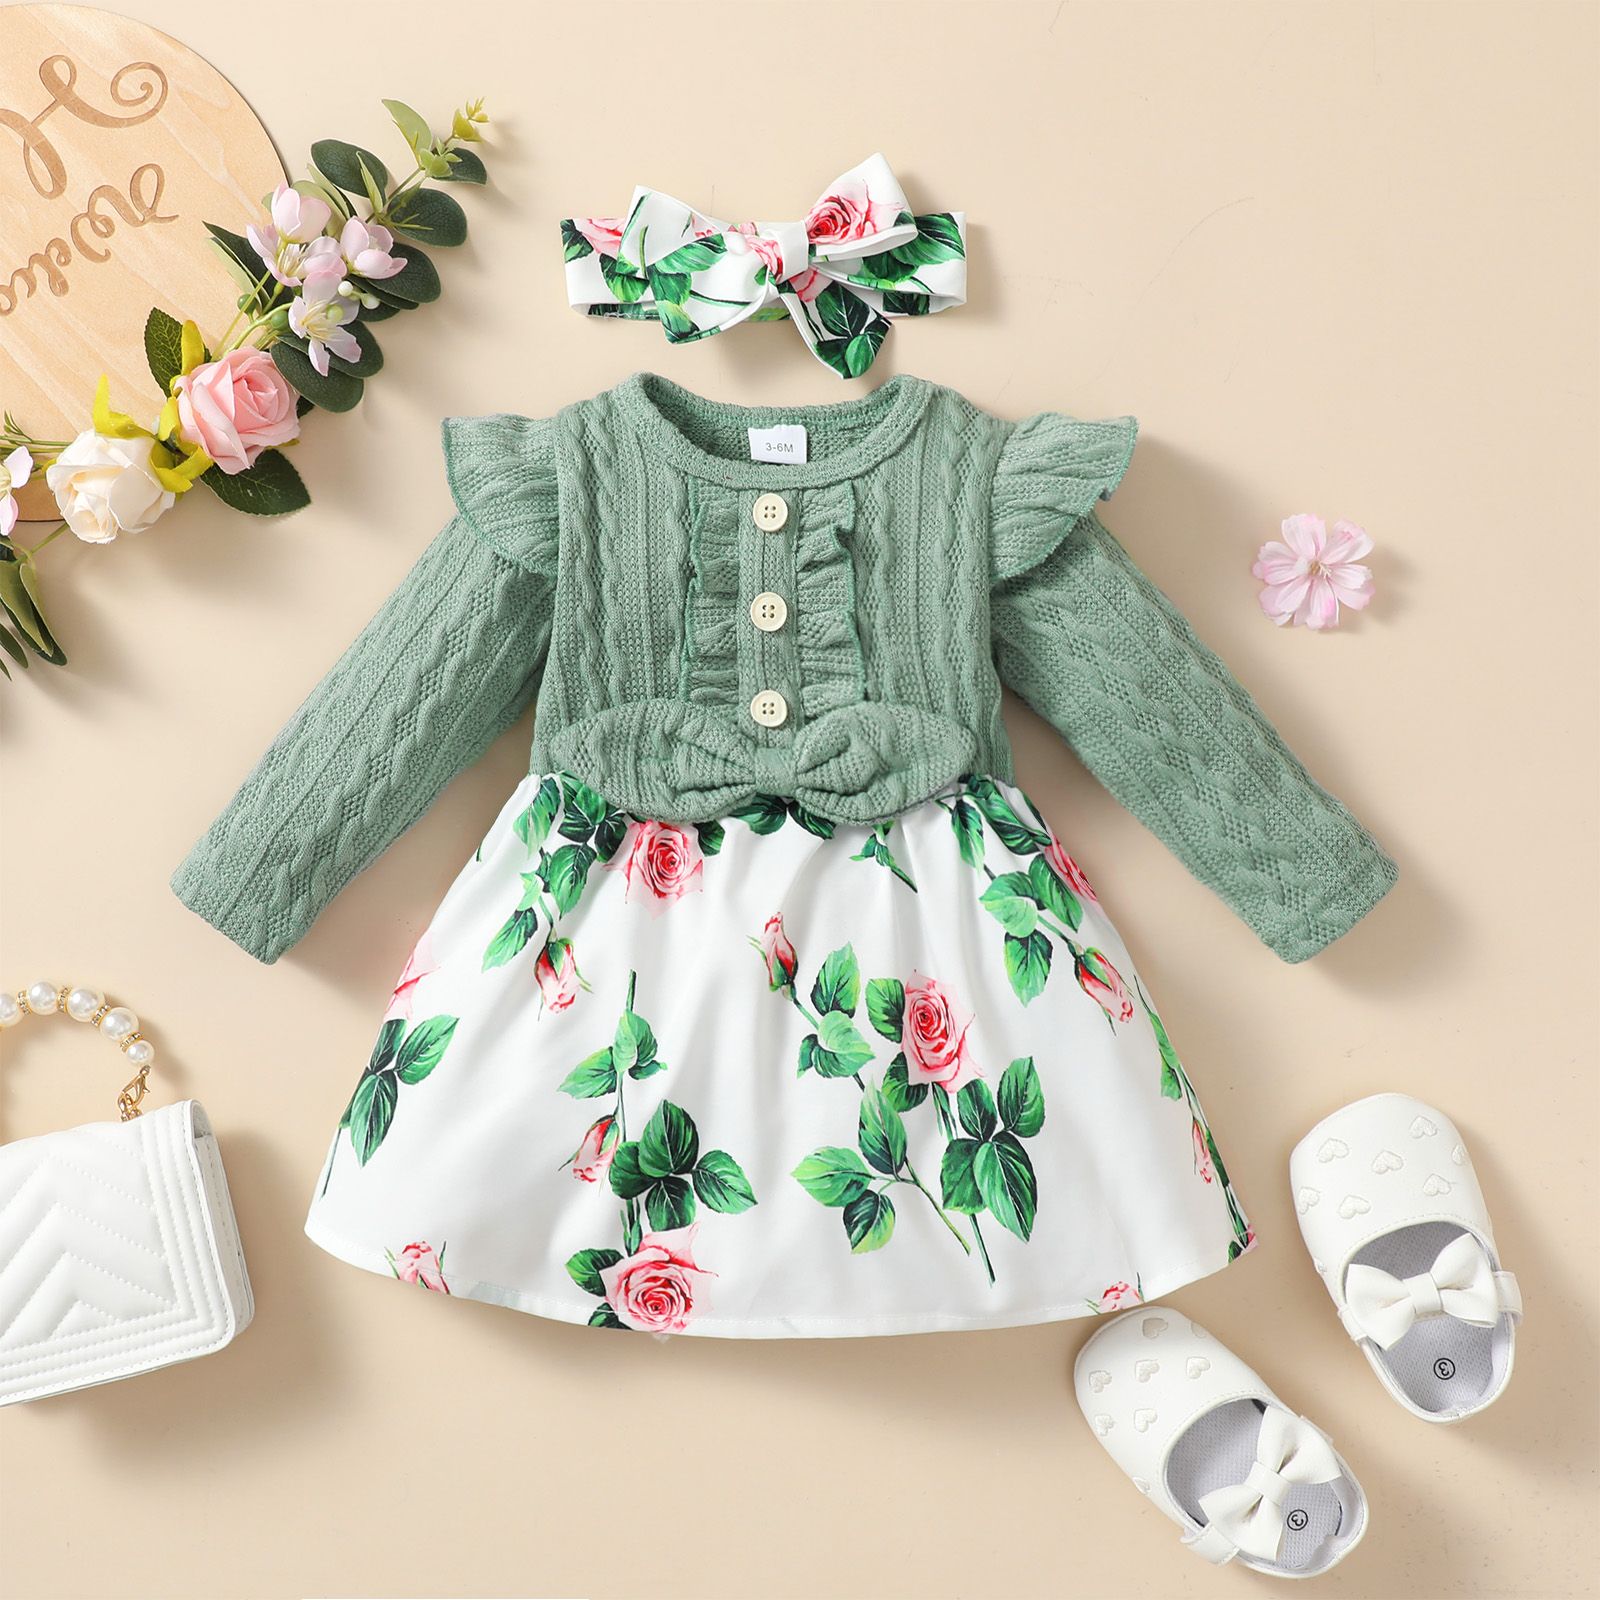 2pcs Baby Girl Green Cable Knit Ruffle Long-sleeve Spliced Floral Print Dress With Headband Set